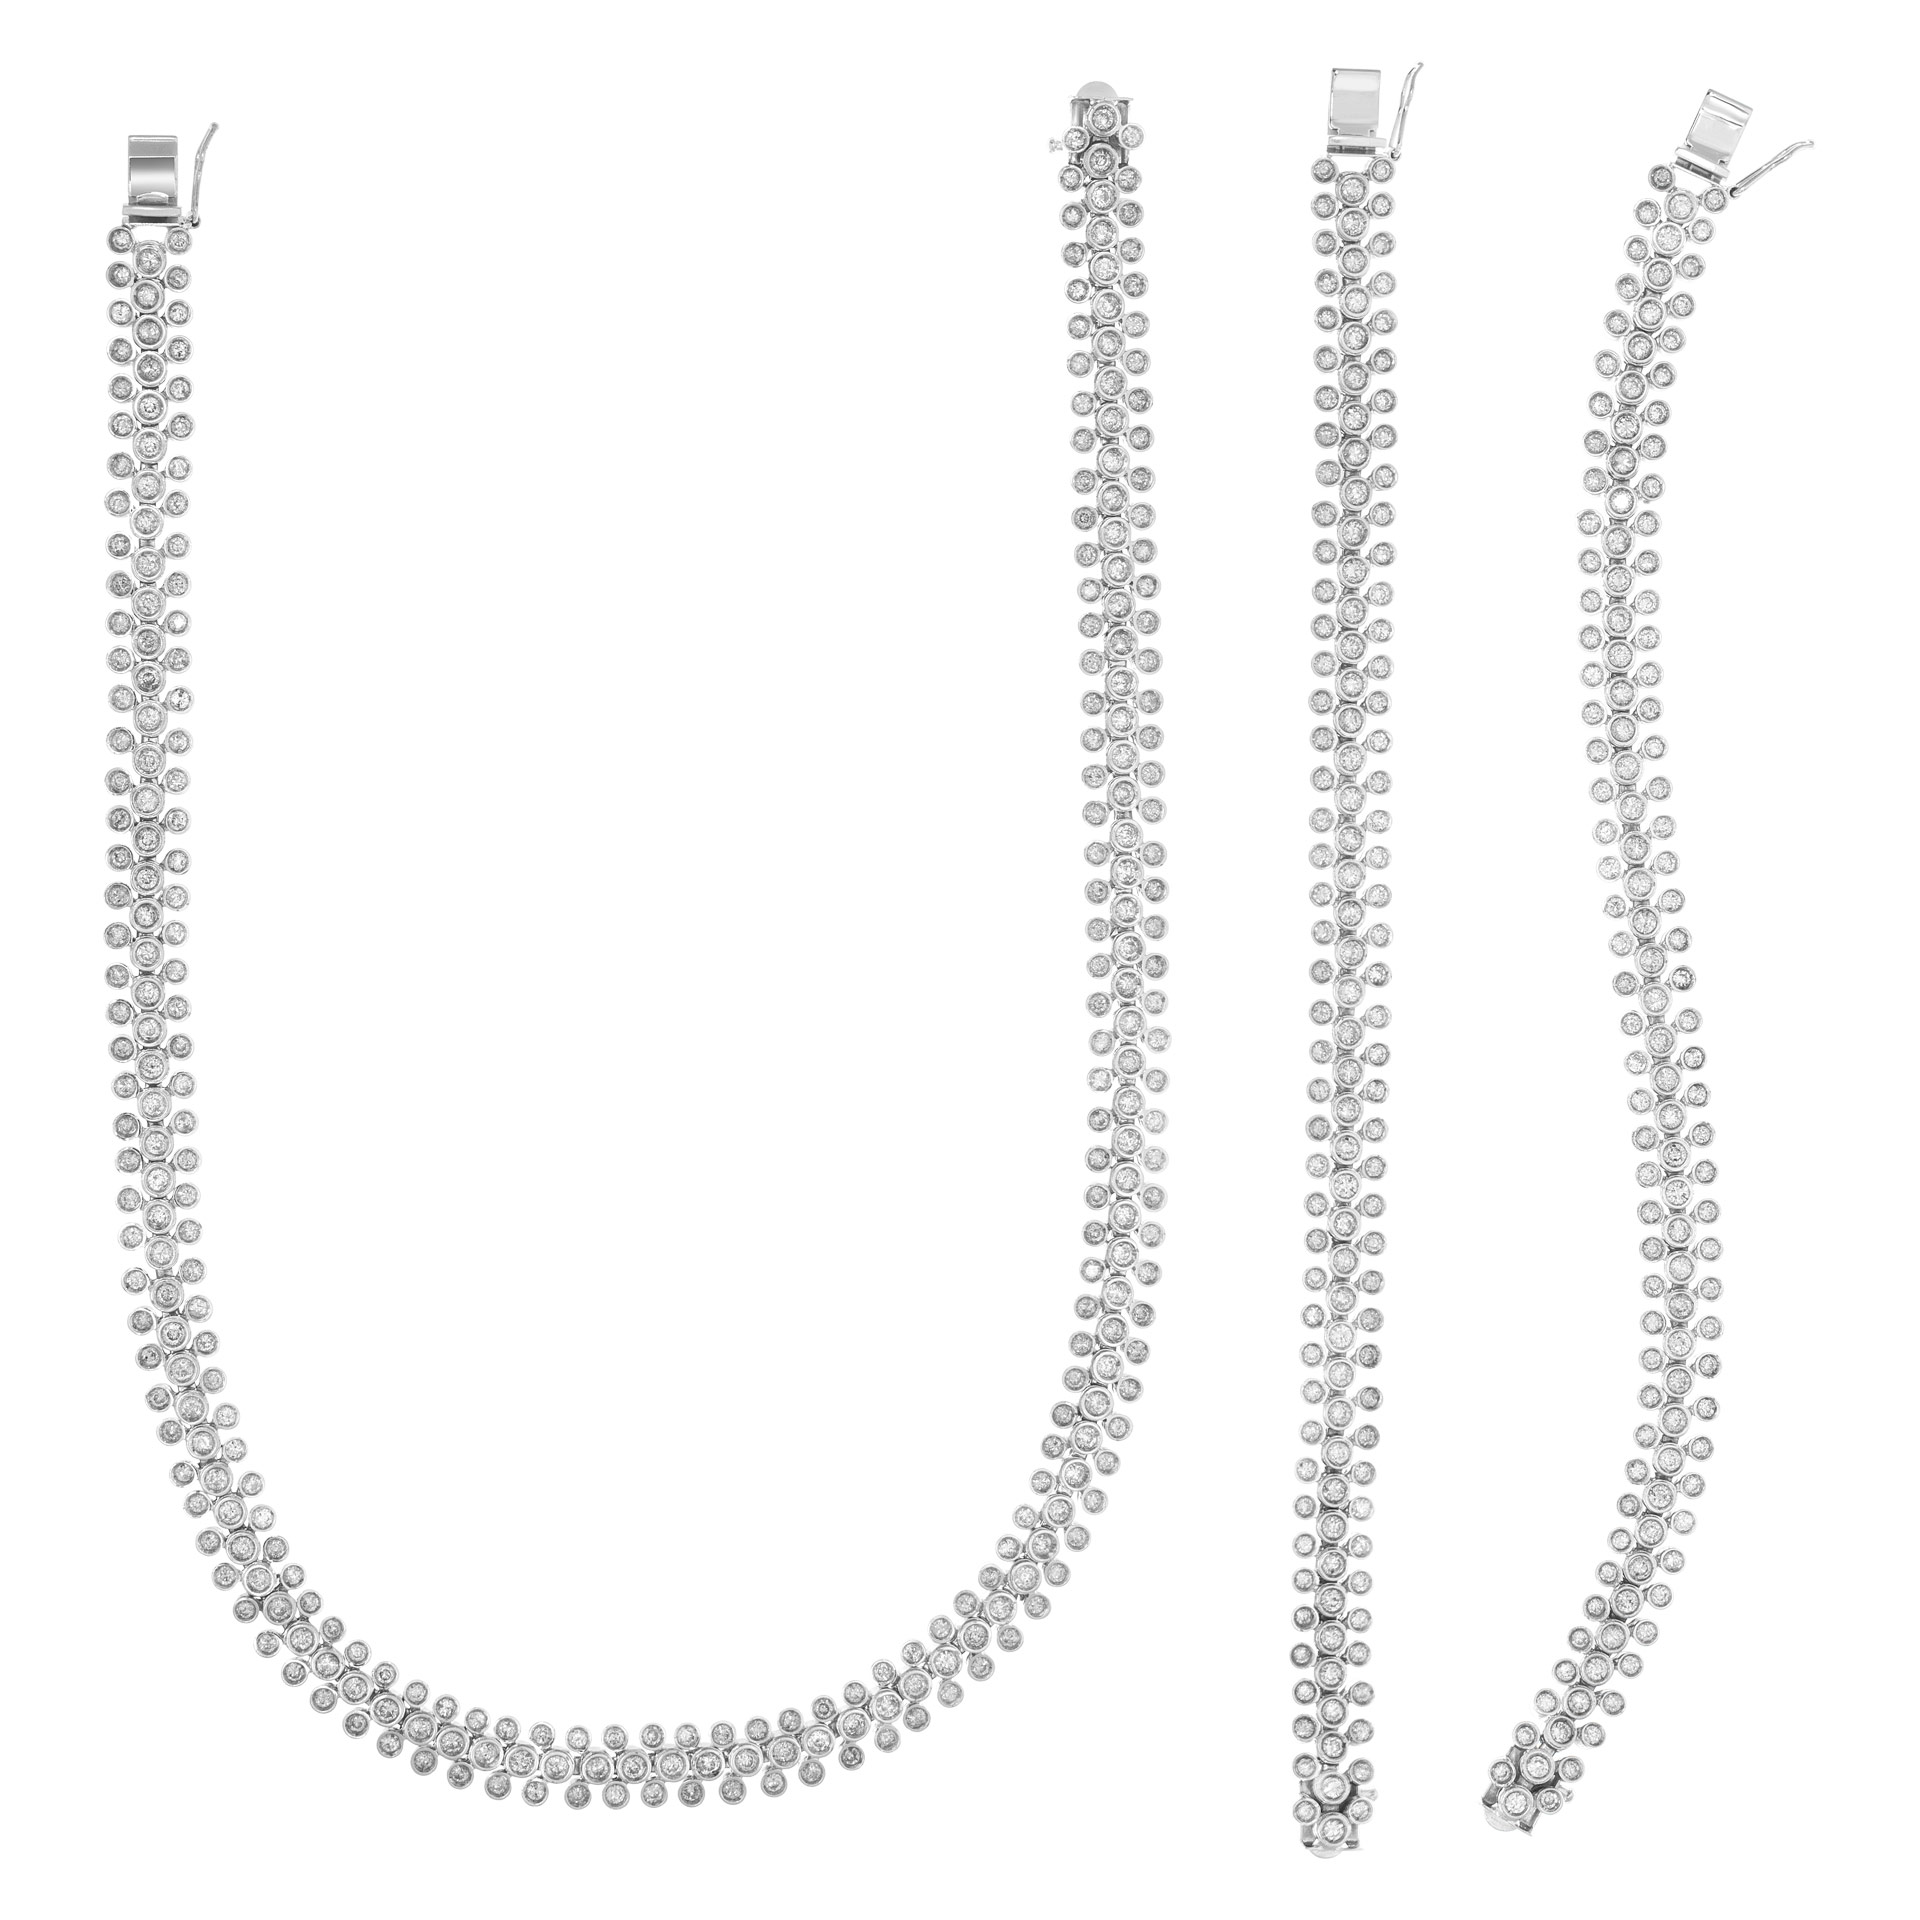 Diamond necklace and double bracelet set with 22.50 carats in diamonds